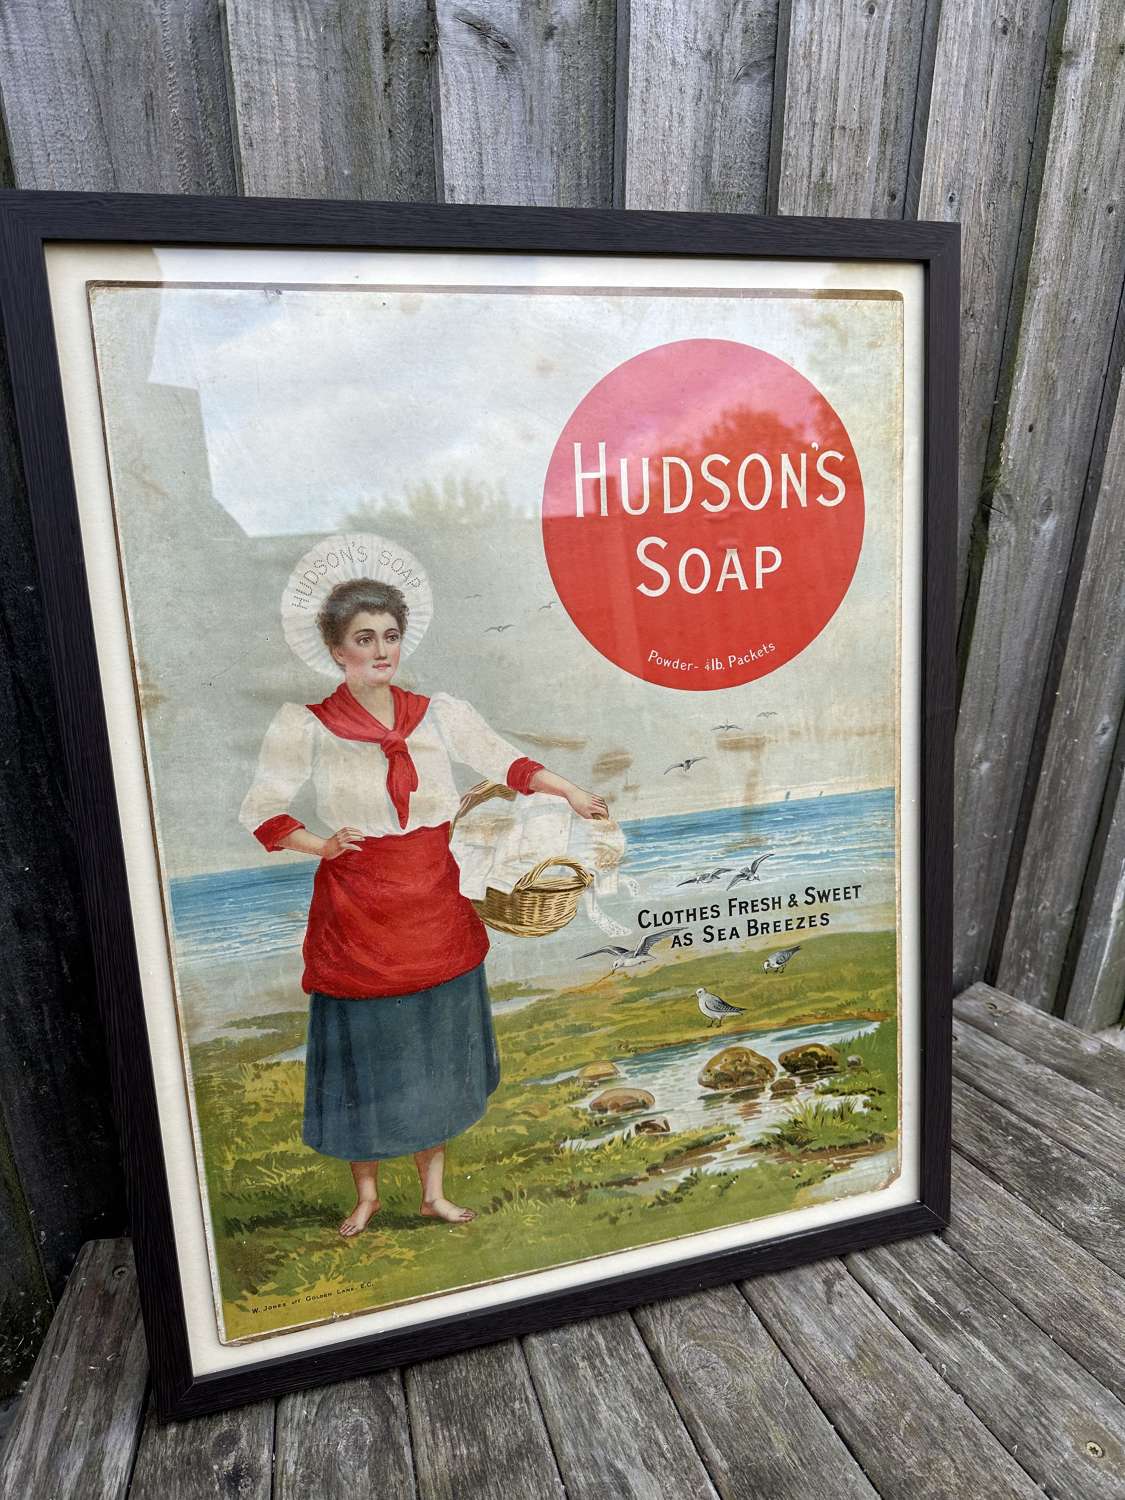 Lovely early Hudson soap advertising showcard with the washer woman